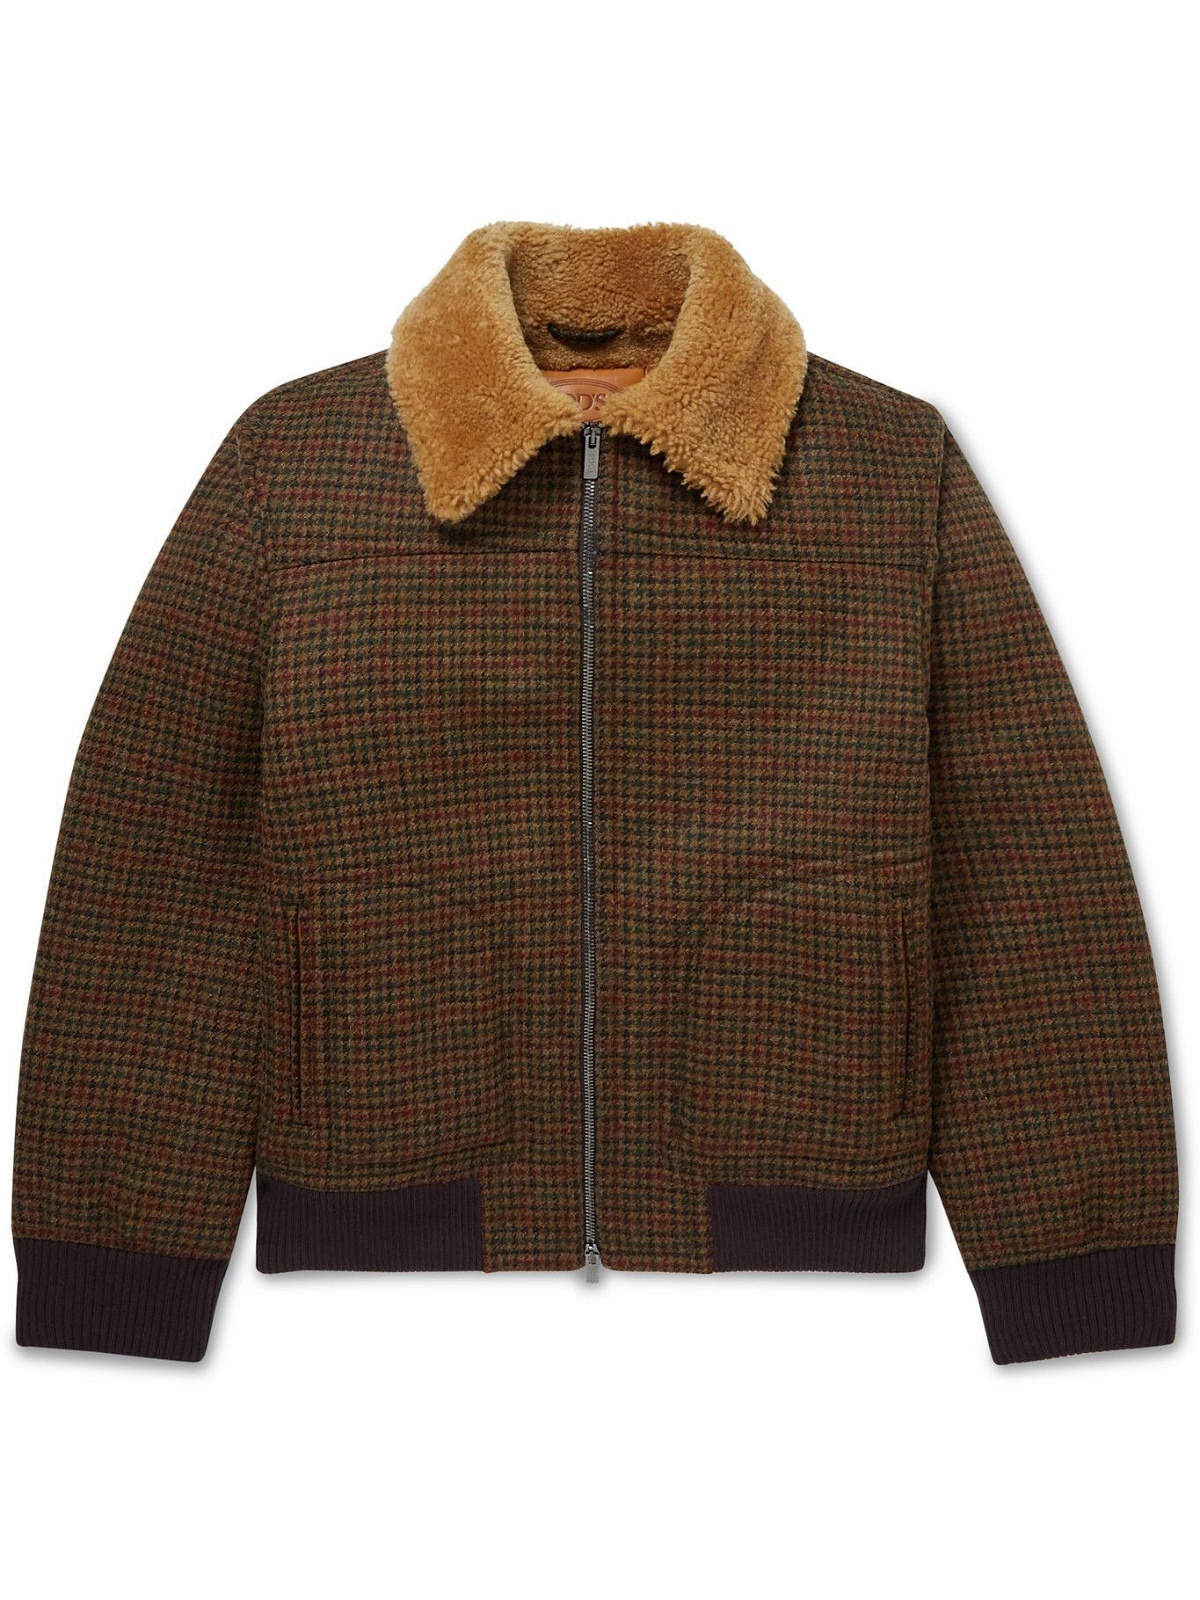 Tod's - Shearling-Lined Houndstooth Shetland Wool Bomber Jacket